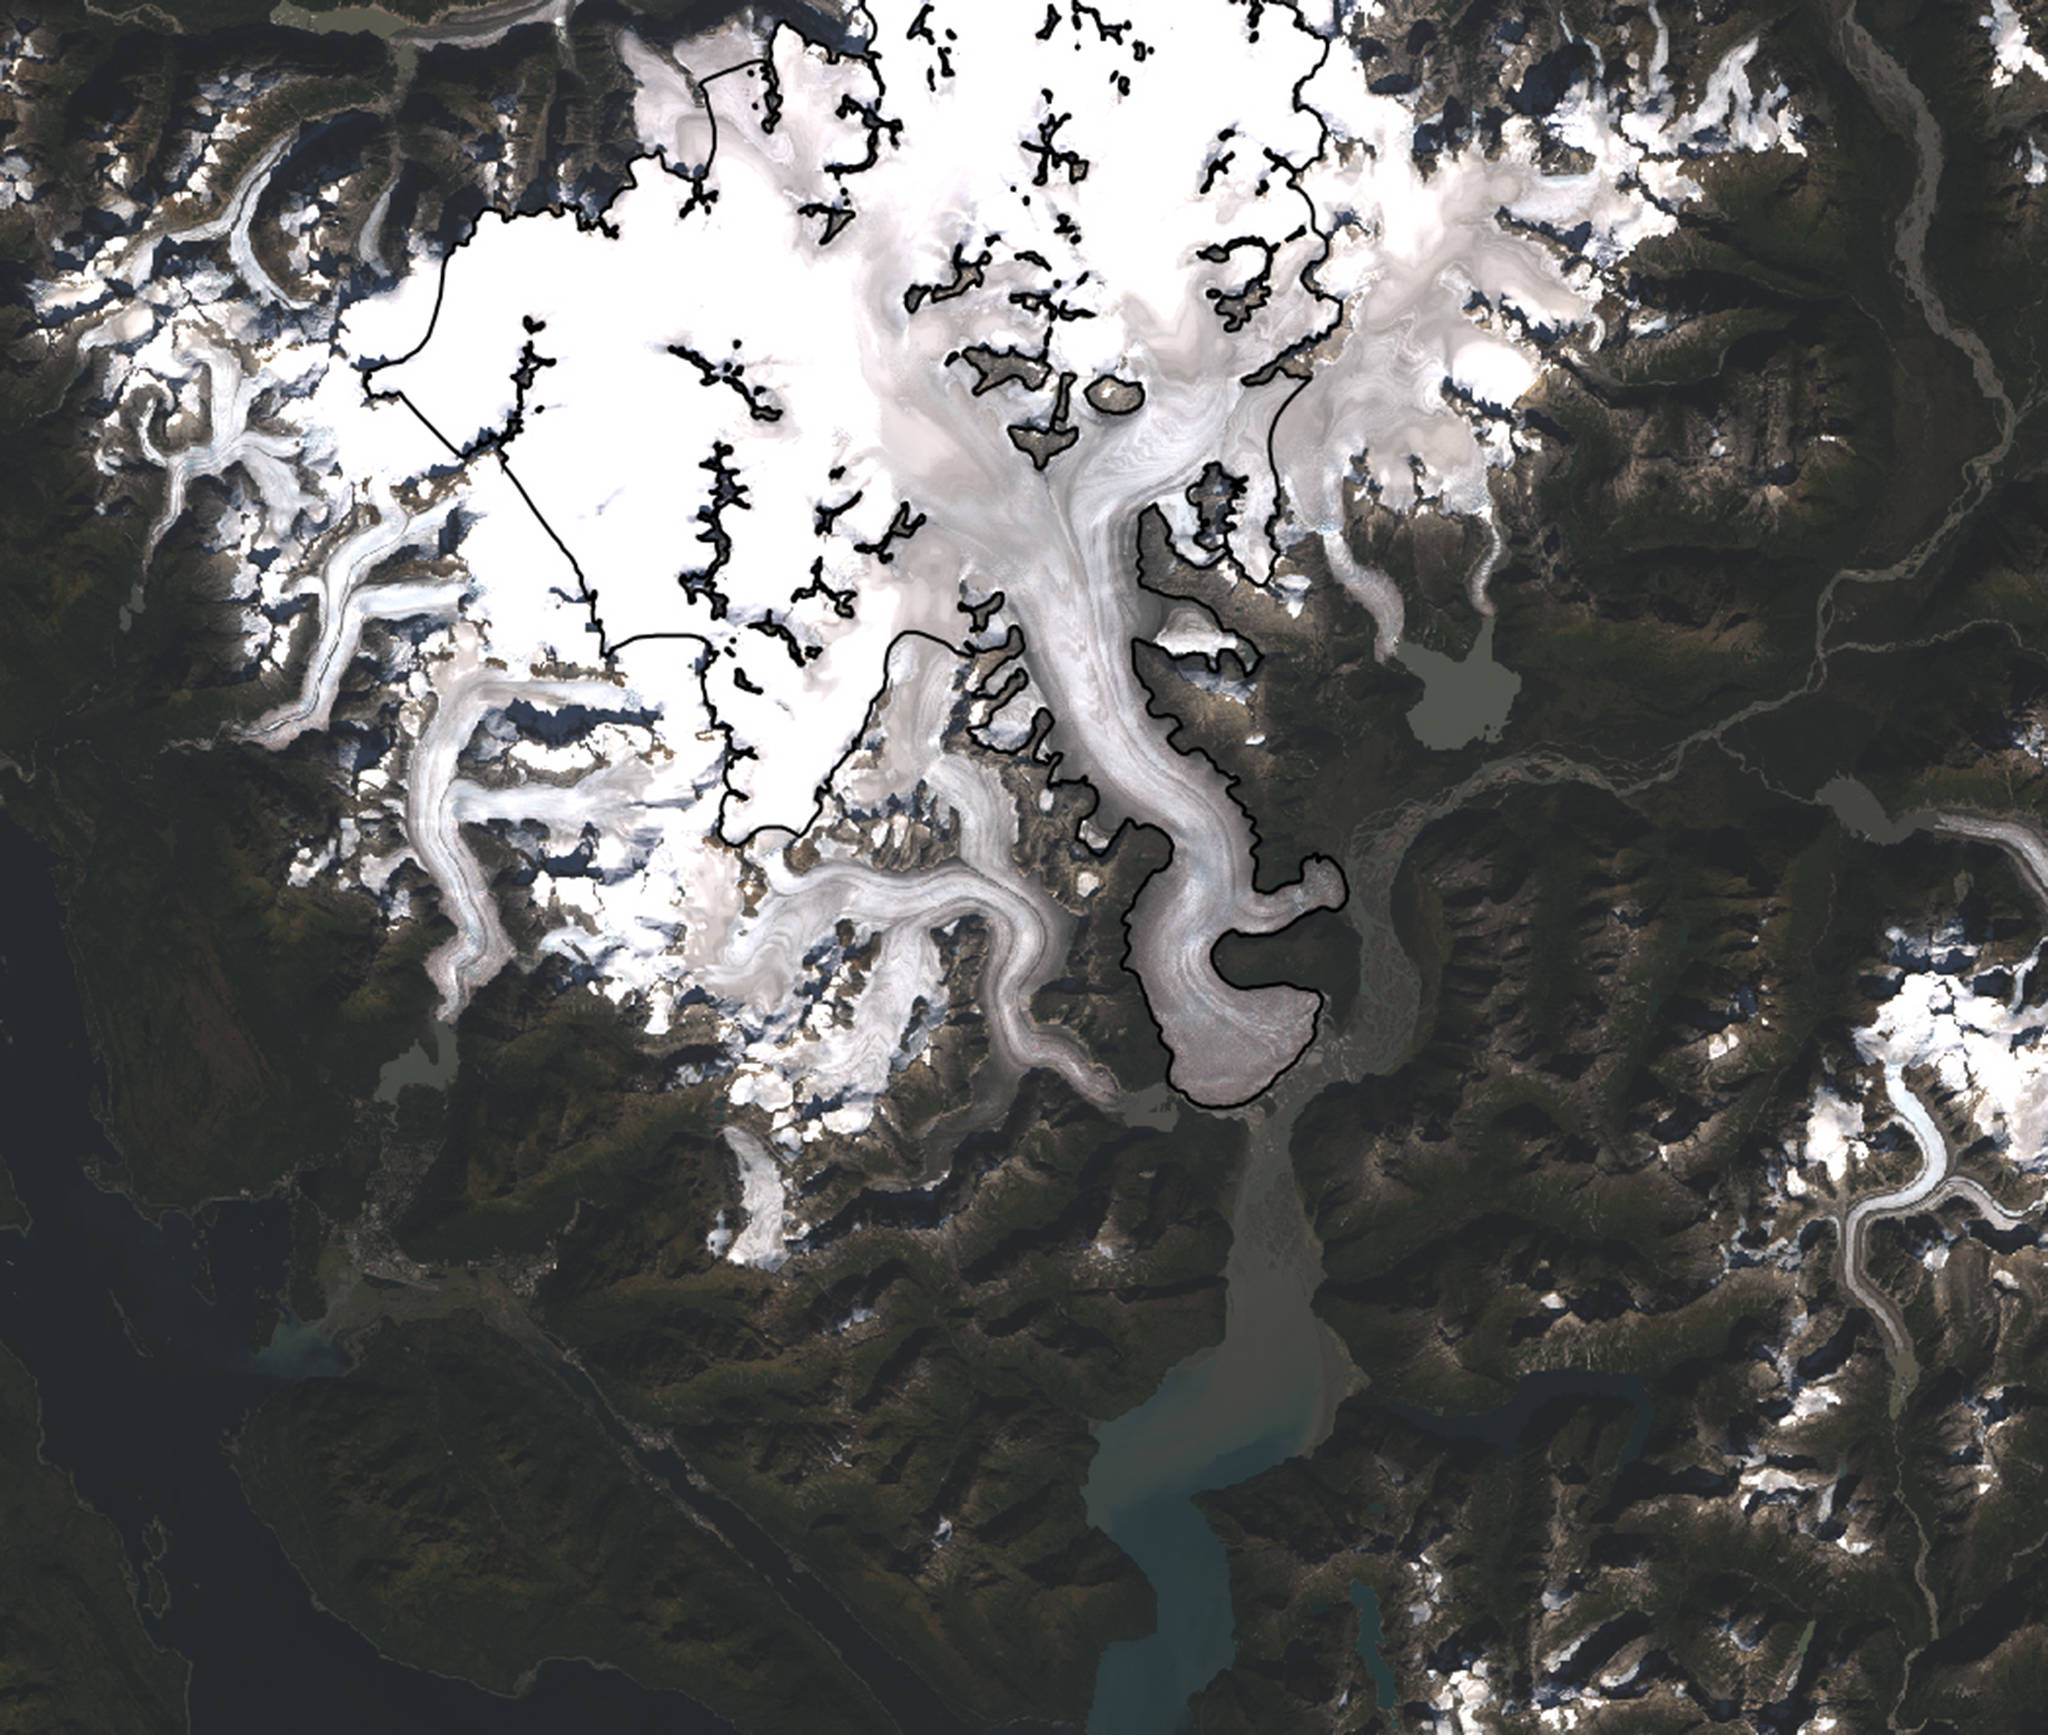 This Landsat image shows the outline of Taku Glacier within the Juneau Icefield. Taku Glacier was advancing for more than 200 years, but it now appears to be retreating. (Satellite Image)